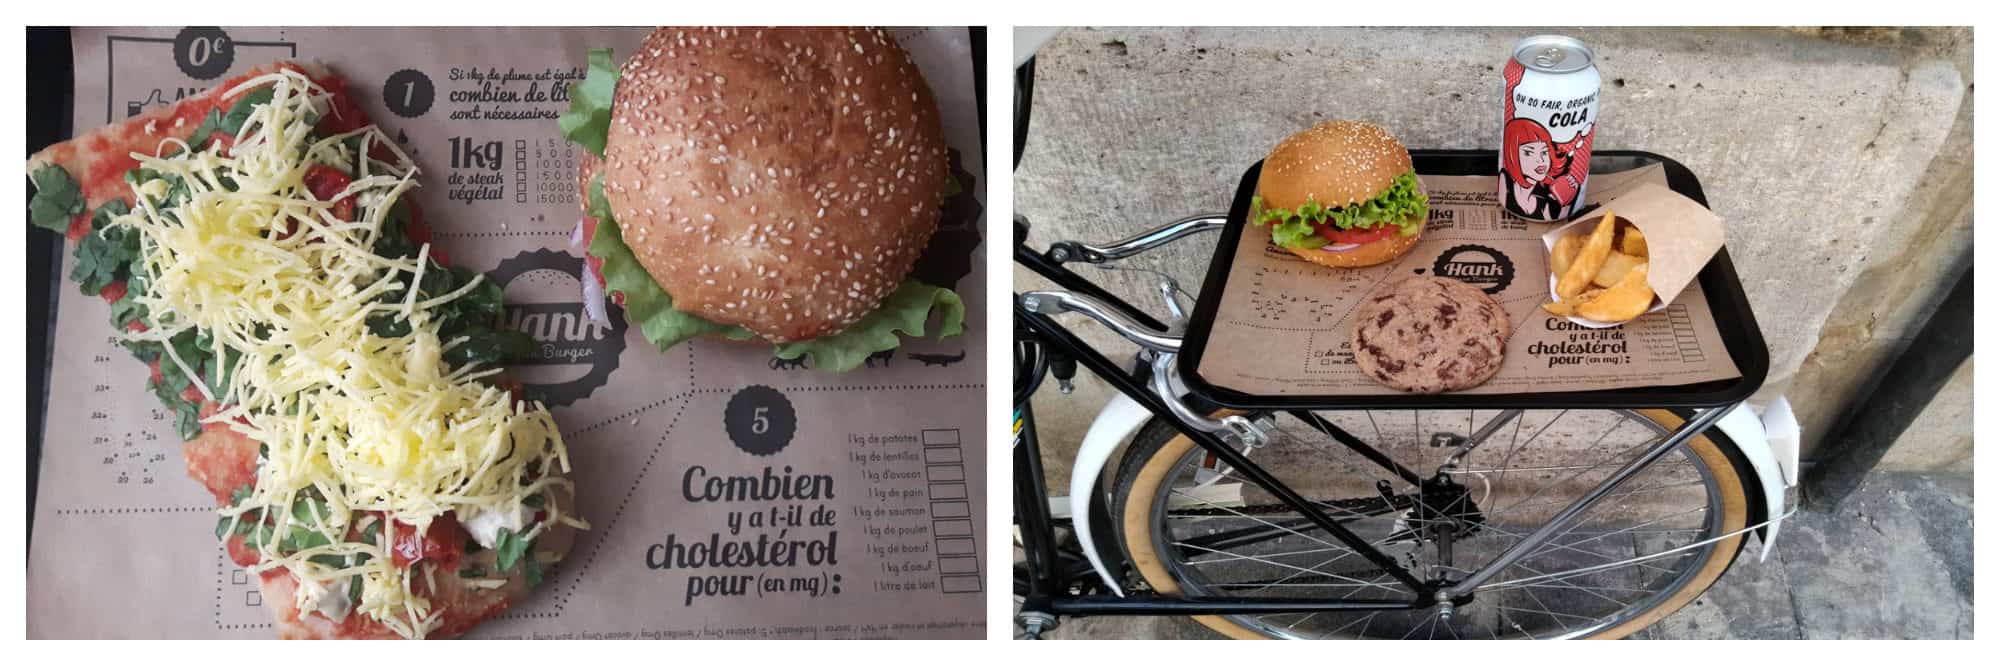 Hank's vegan cheese pizza-toast and burger (left) and a tray with a burger and fries, a cookie, and a canned soda on the back of a bike (right).